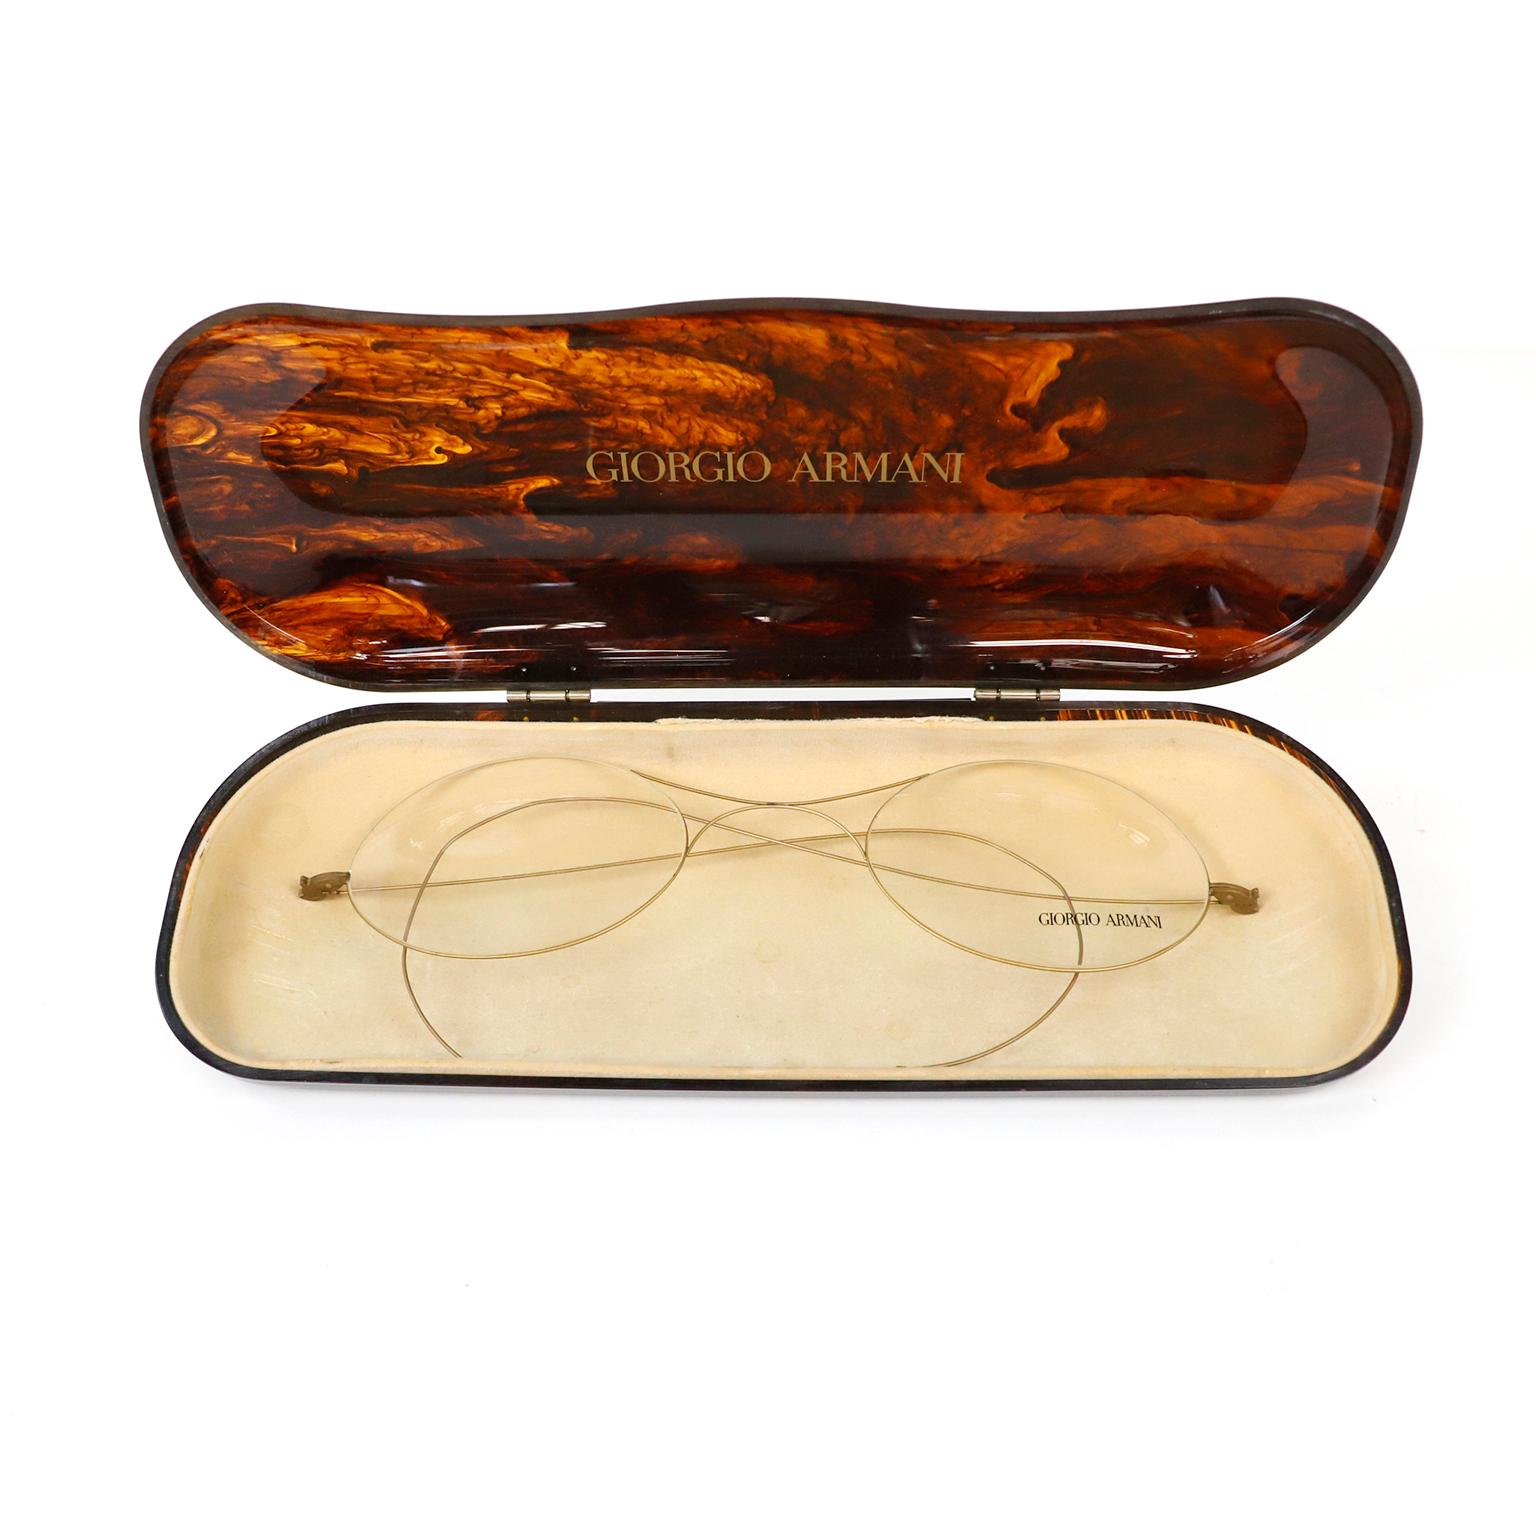 We offer this very large mid-twentieth century French faux tortoise shell glass case factice features a pair of large wire rim glasses. Both the case and glasses are marked Georgio Armani. Originally created by Armani for a designer eyewear shop in